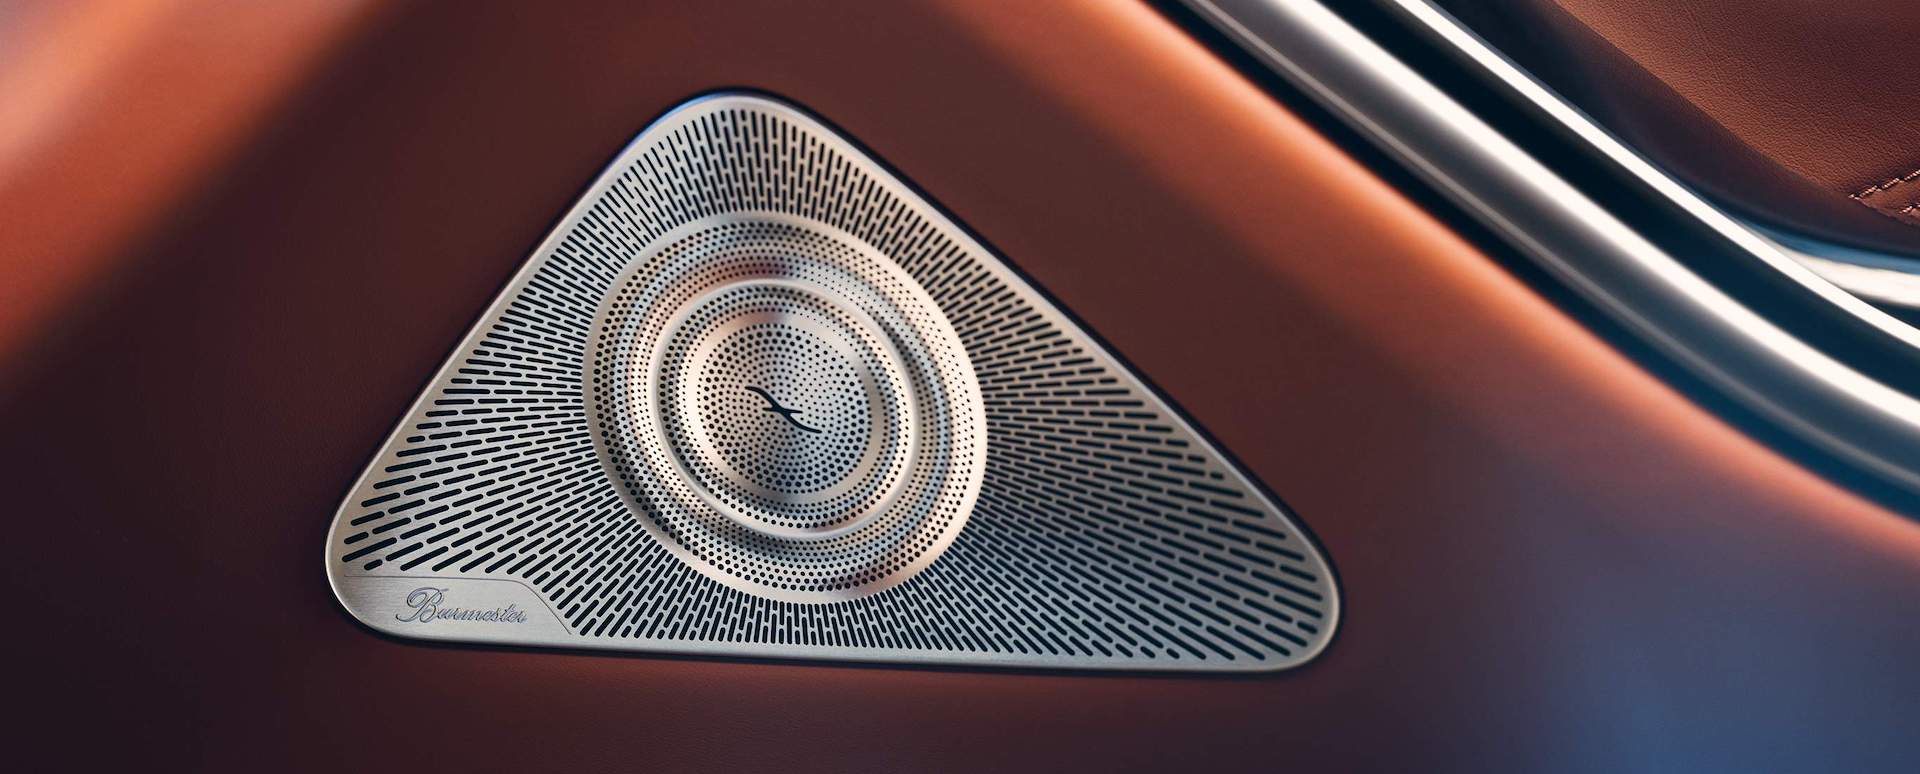 Mercedes-Benz will be the first cars with support for spatial audio with Apple Music